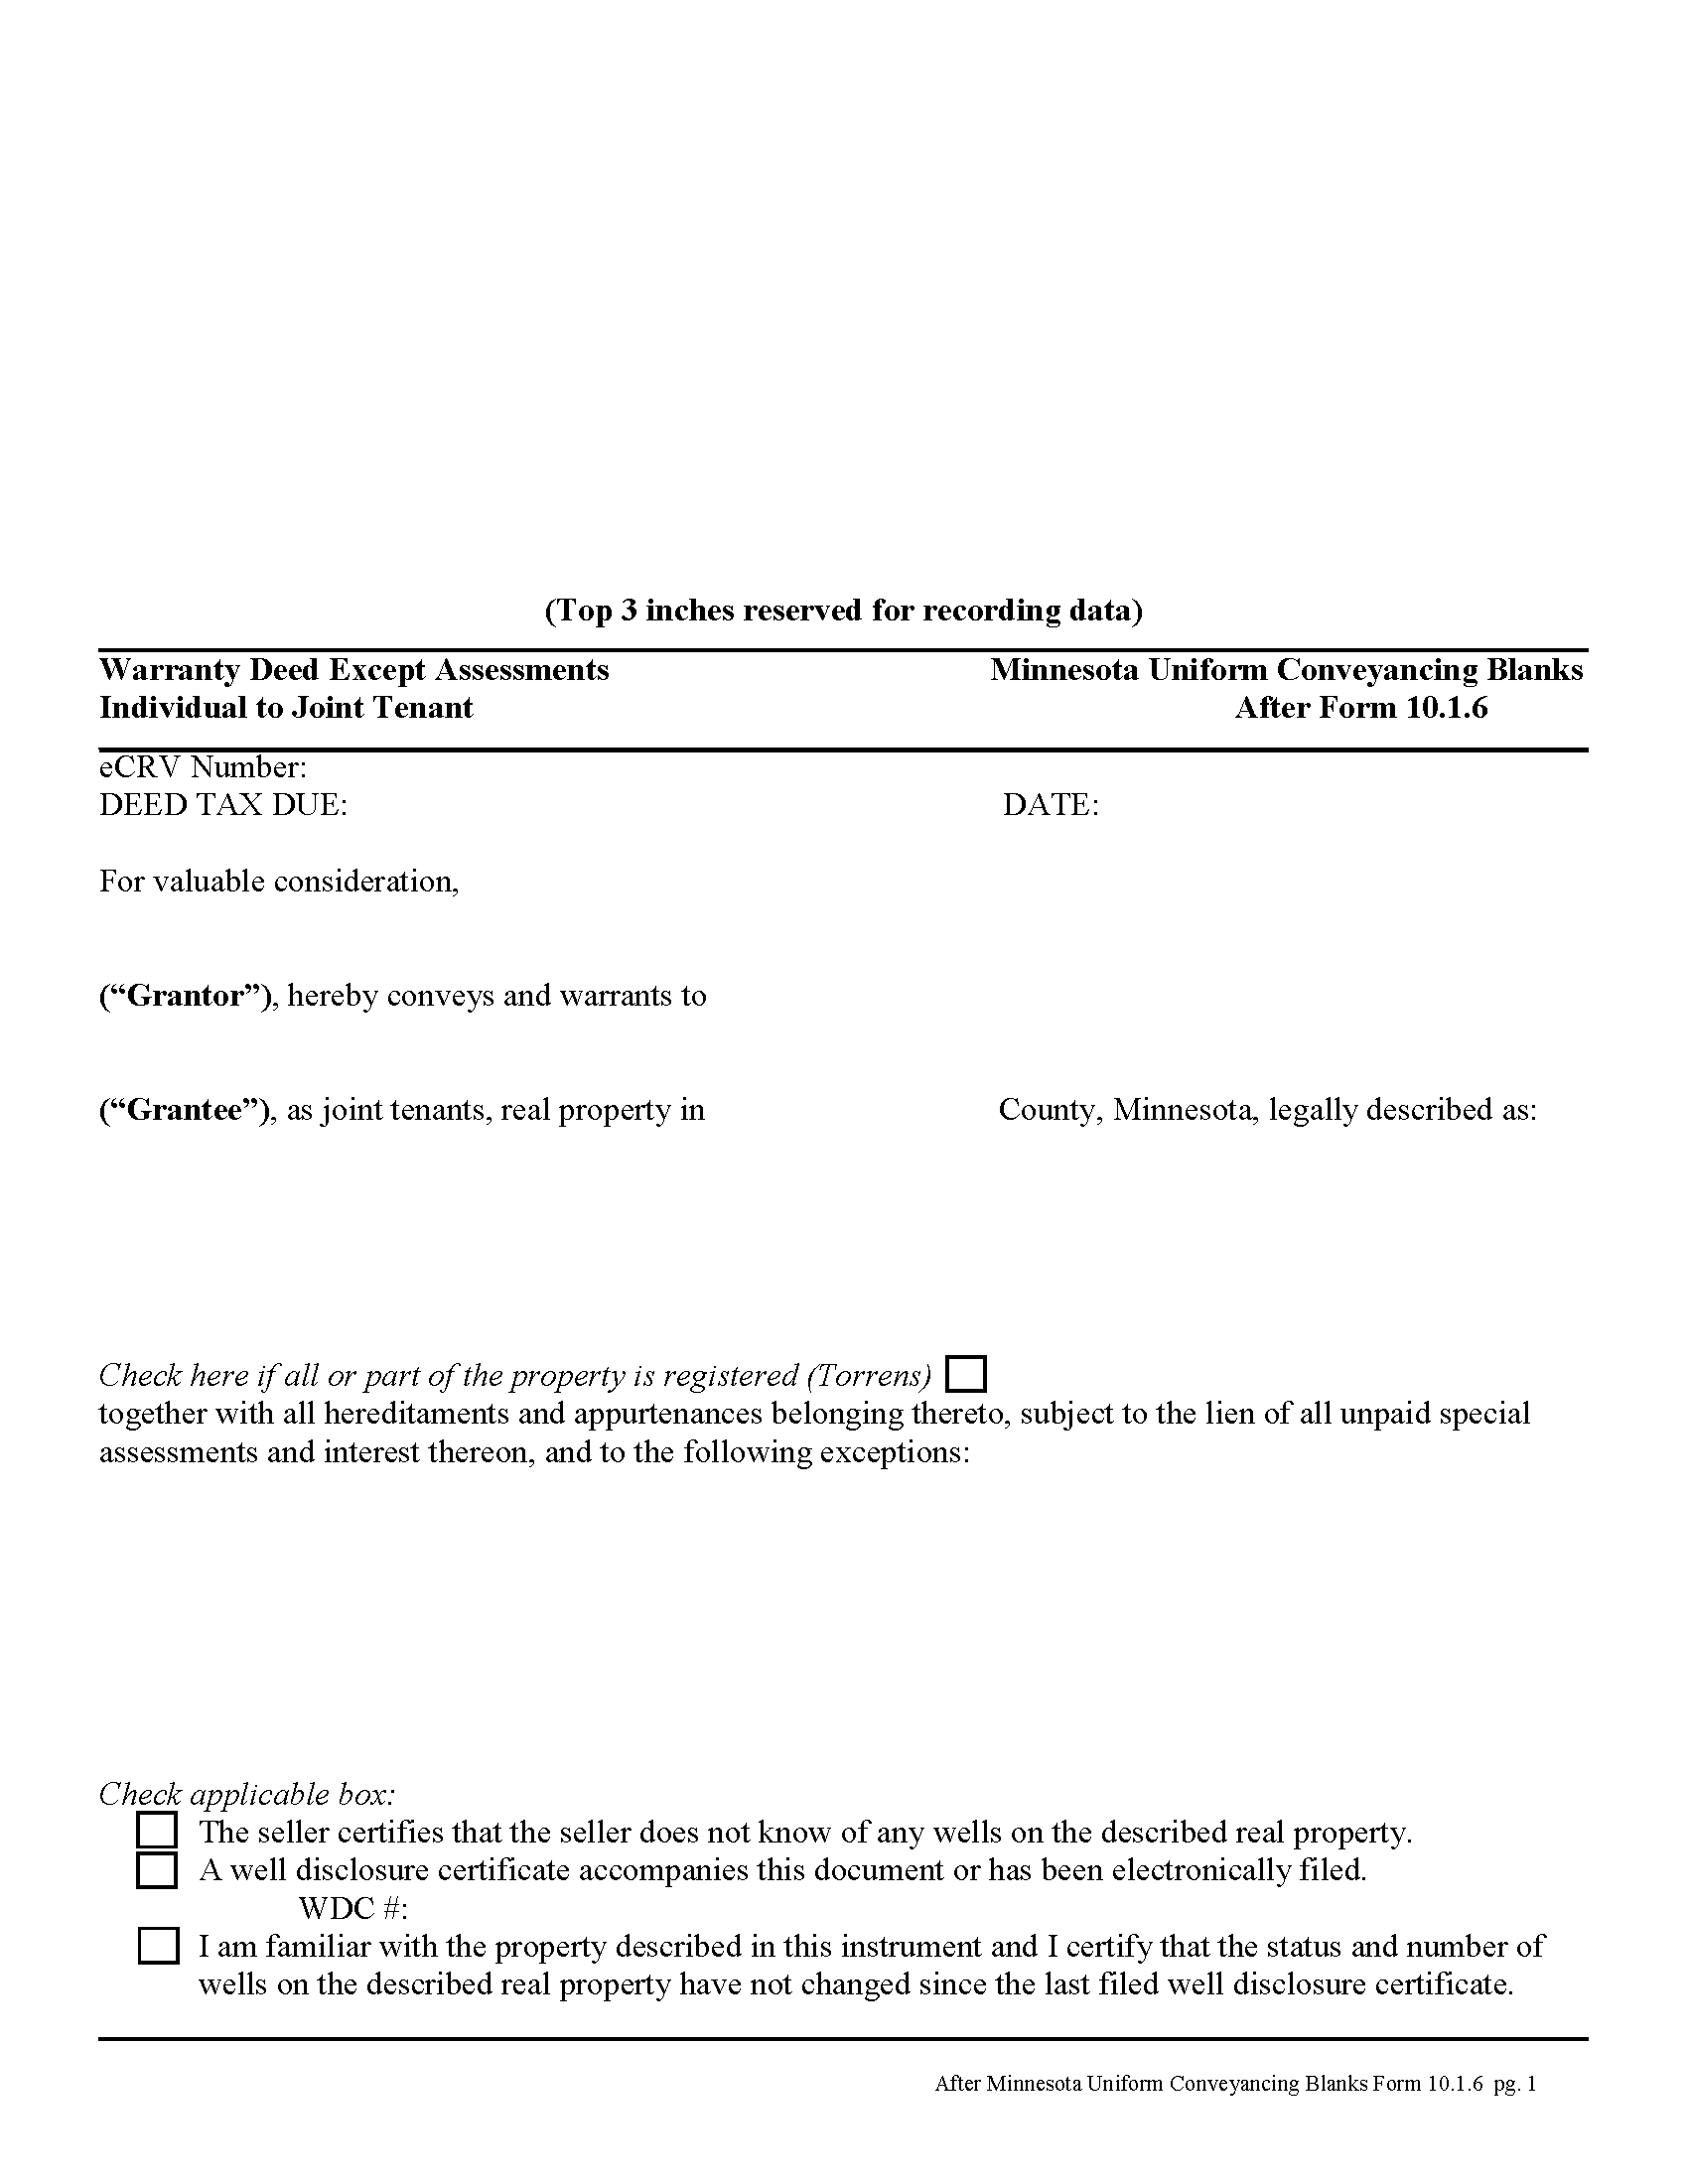 Minnesota Warranty Deed from Individual to Joint Tenants Excluding Assessments Image